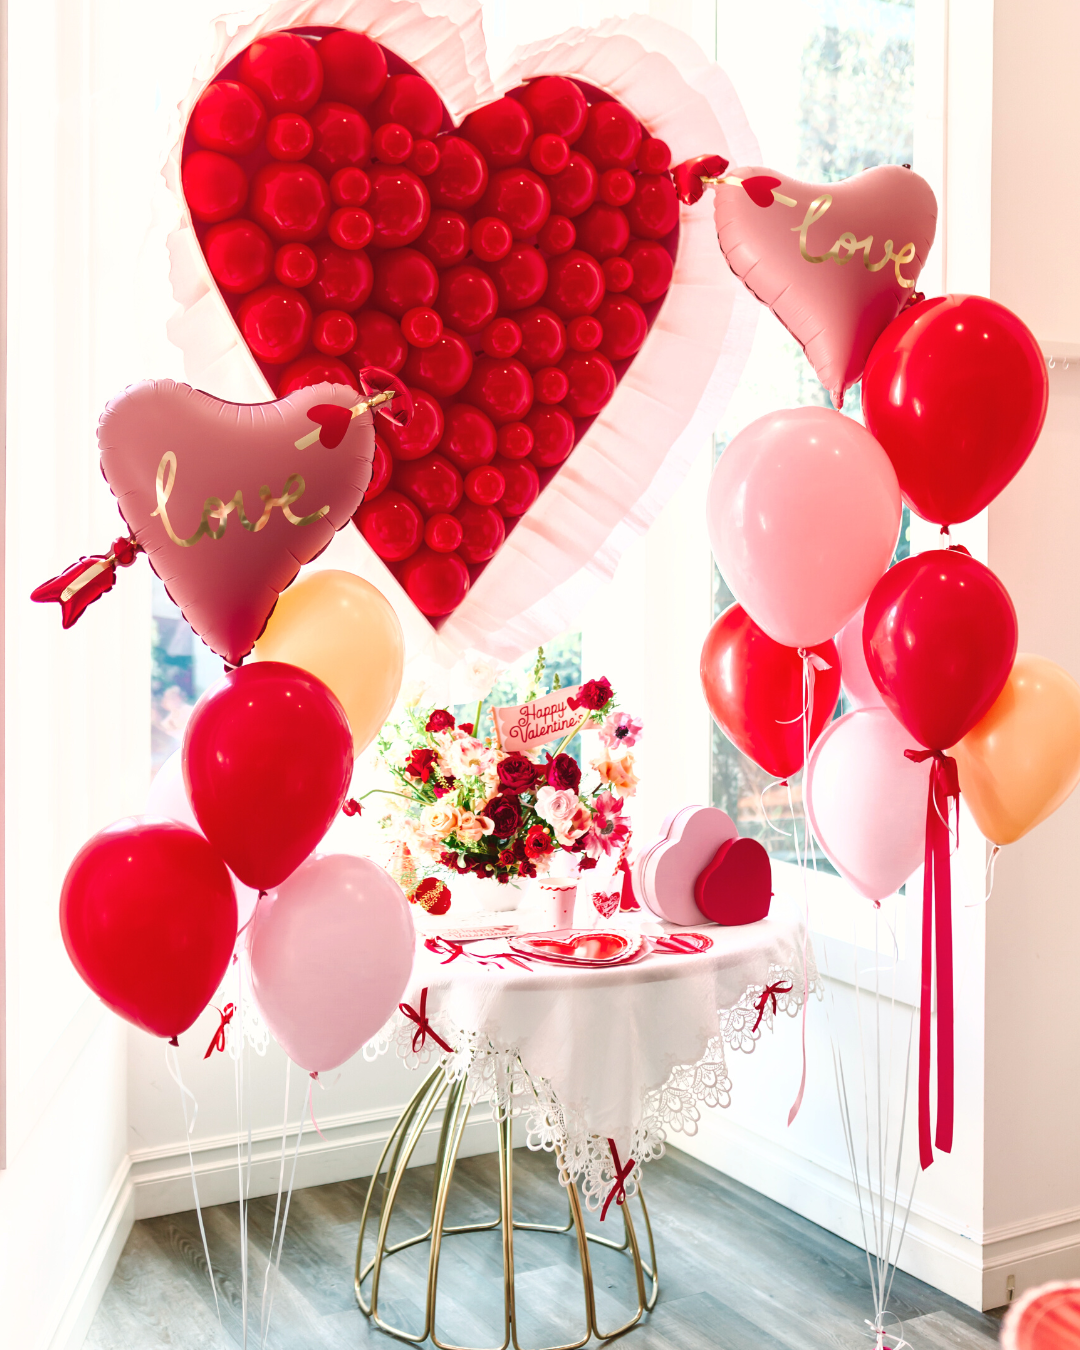 Valentine's Day party ideas Vday party supplies heart balloons galentine's day